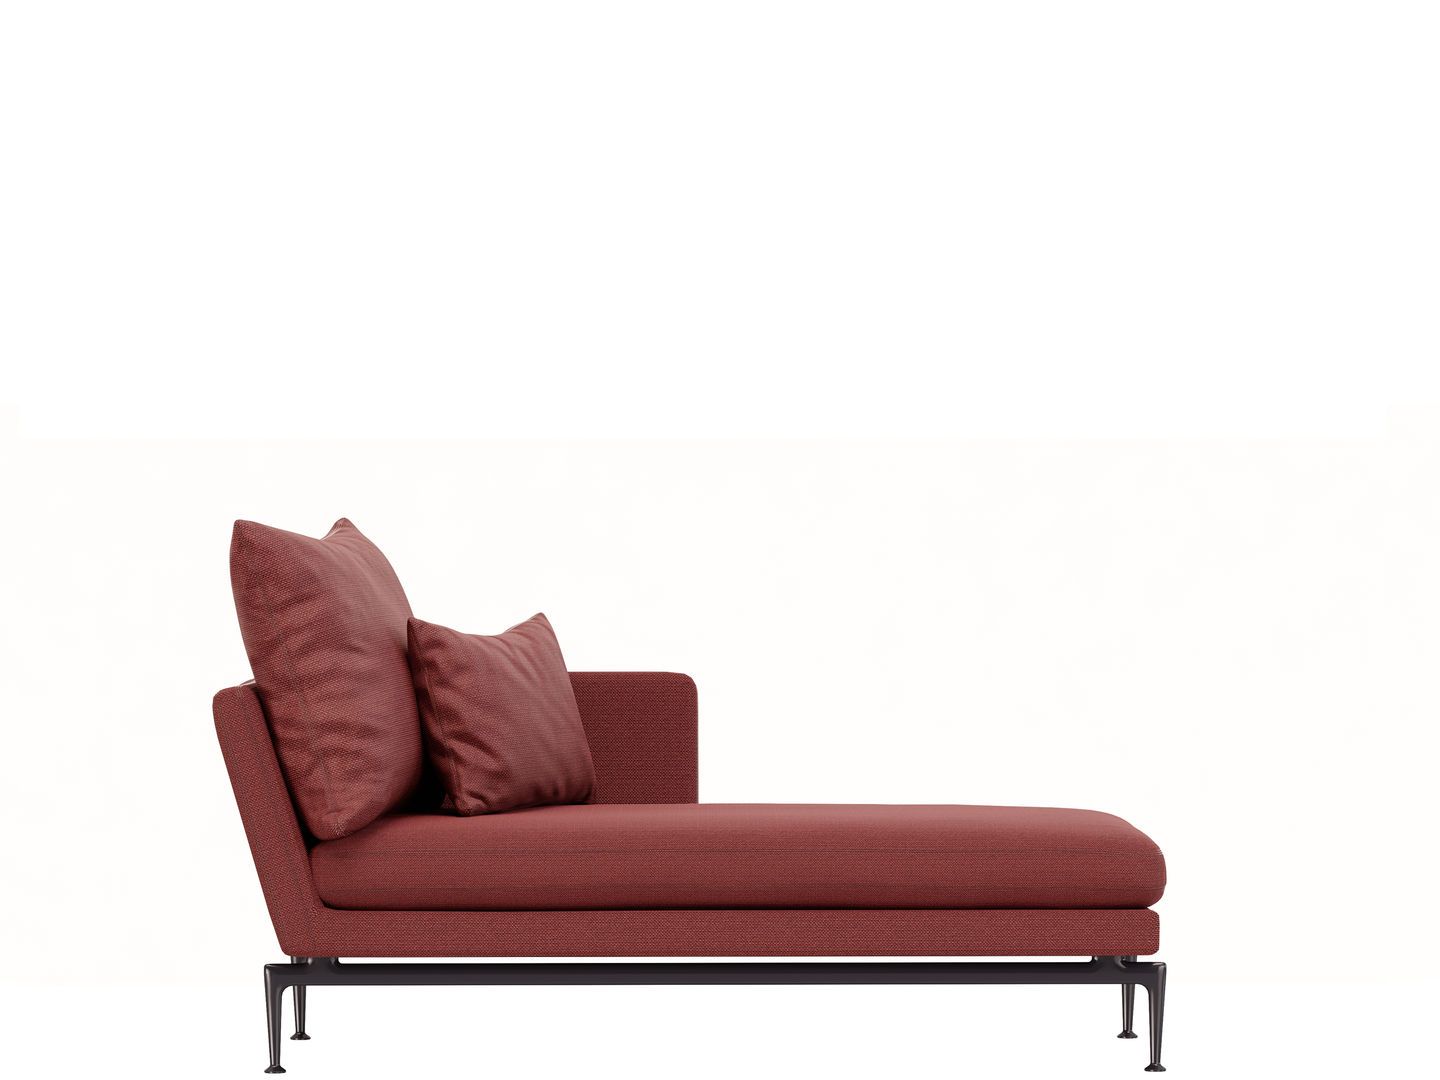 Vitra Suita Chaise Longue with pointed cushions